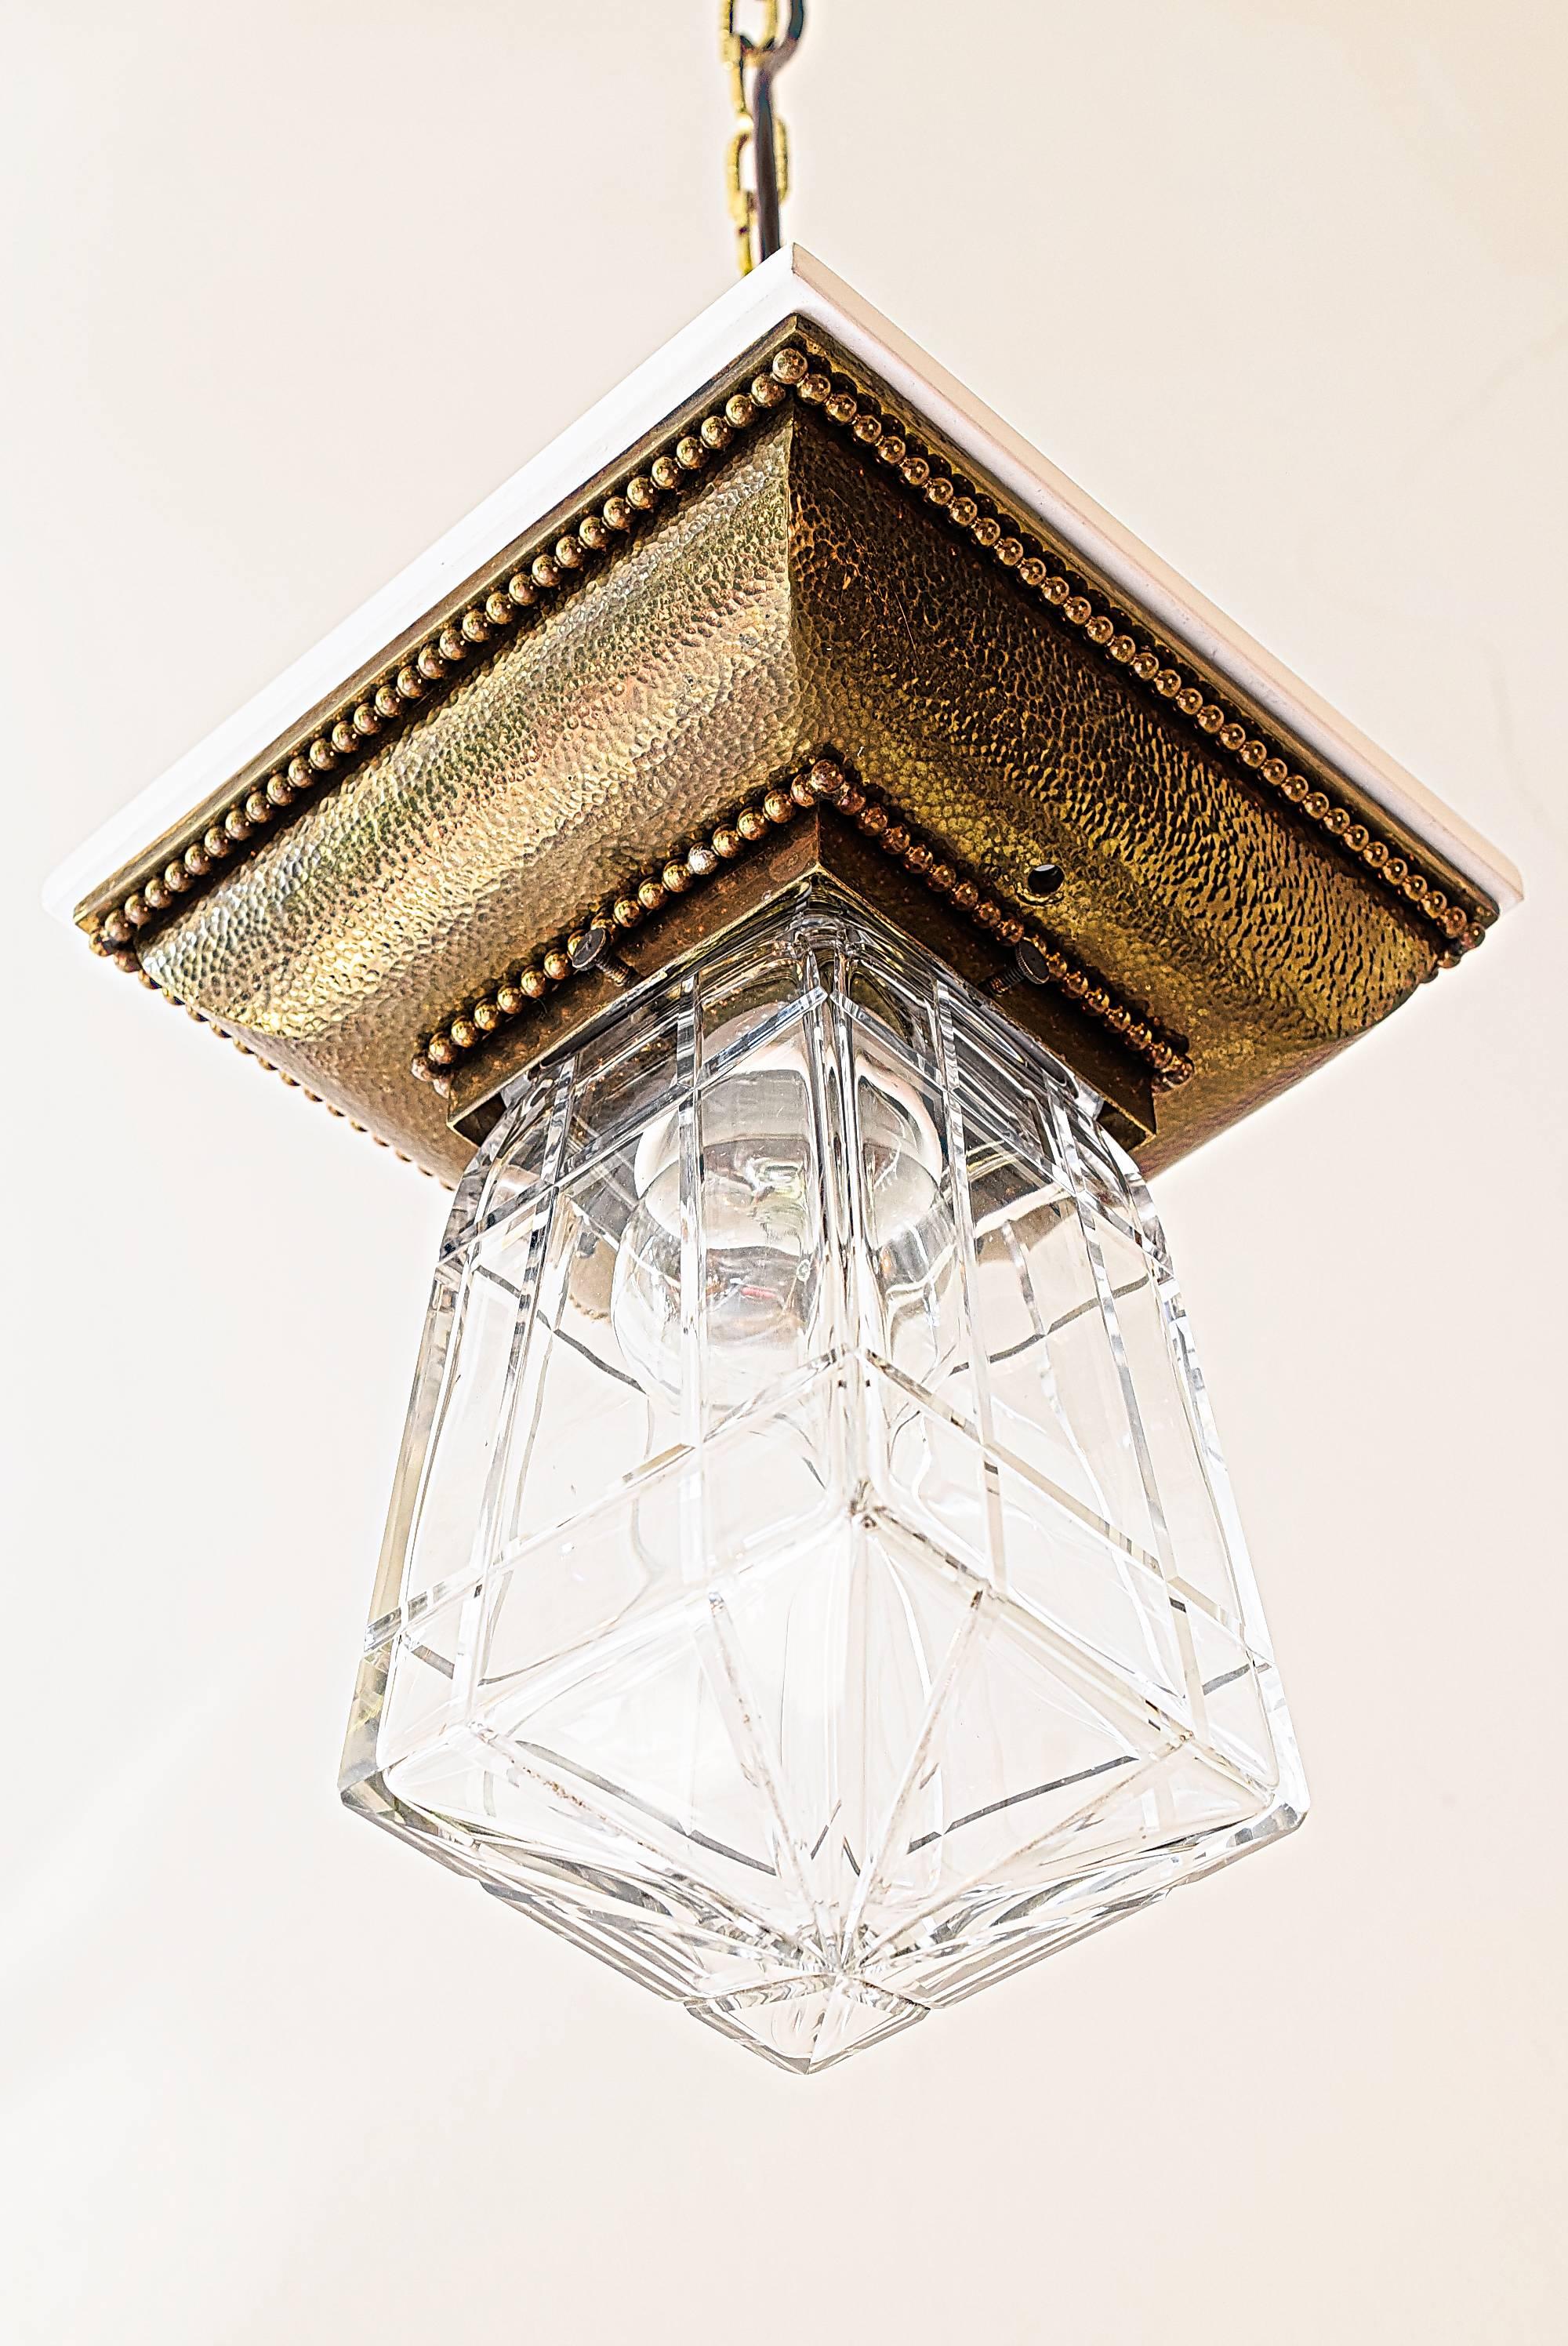 Square ceiling lamp hammered brass and cut glass.
Original condition.
Very nice original patina and solid brass.
Wood painted white.
We still have two similar
look to To: (Hammered ceiling lamp with cut-glass).